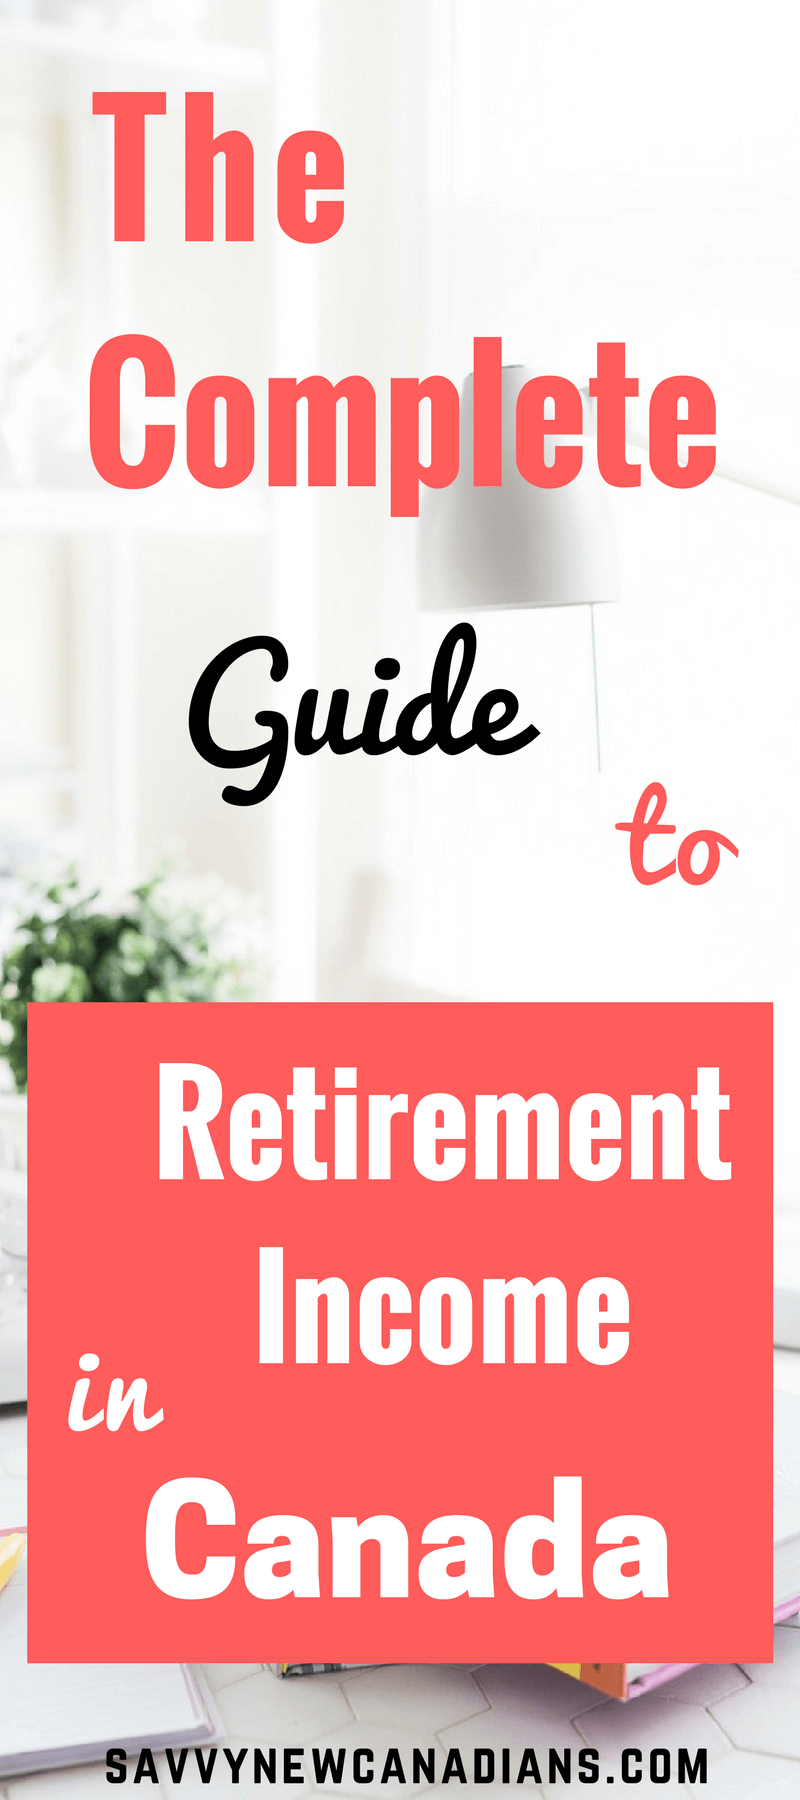 This is everything you need to know about retirement income and retirement planning in Canada. Check out these guide for how much money you will need in retirement, how much you can expect in pensions and benefits, how to invest and the retirement accounts available, and more. #financialplanning #retirement #retirementplanning #saving #investing #RRSP #TFSA #OAS #CPP #GIS #personalfinance